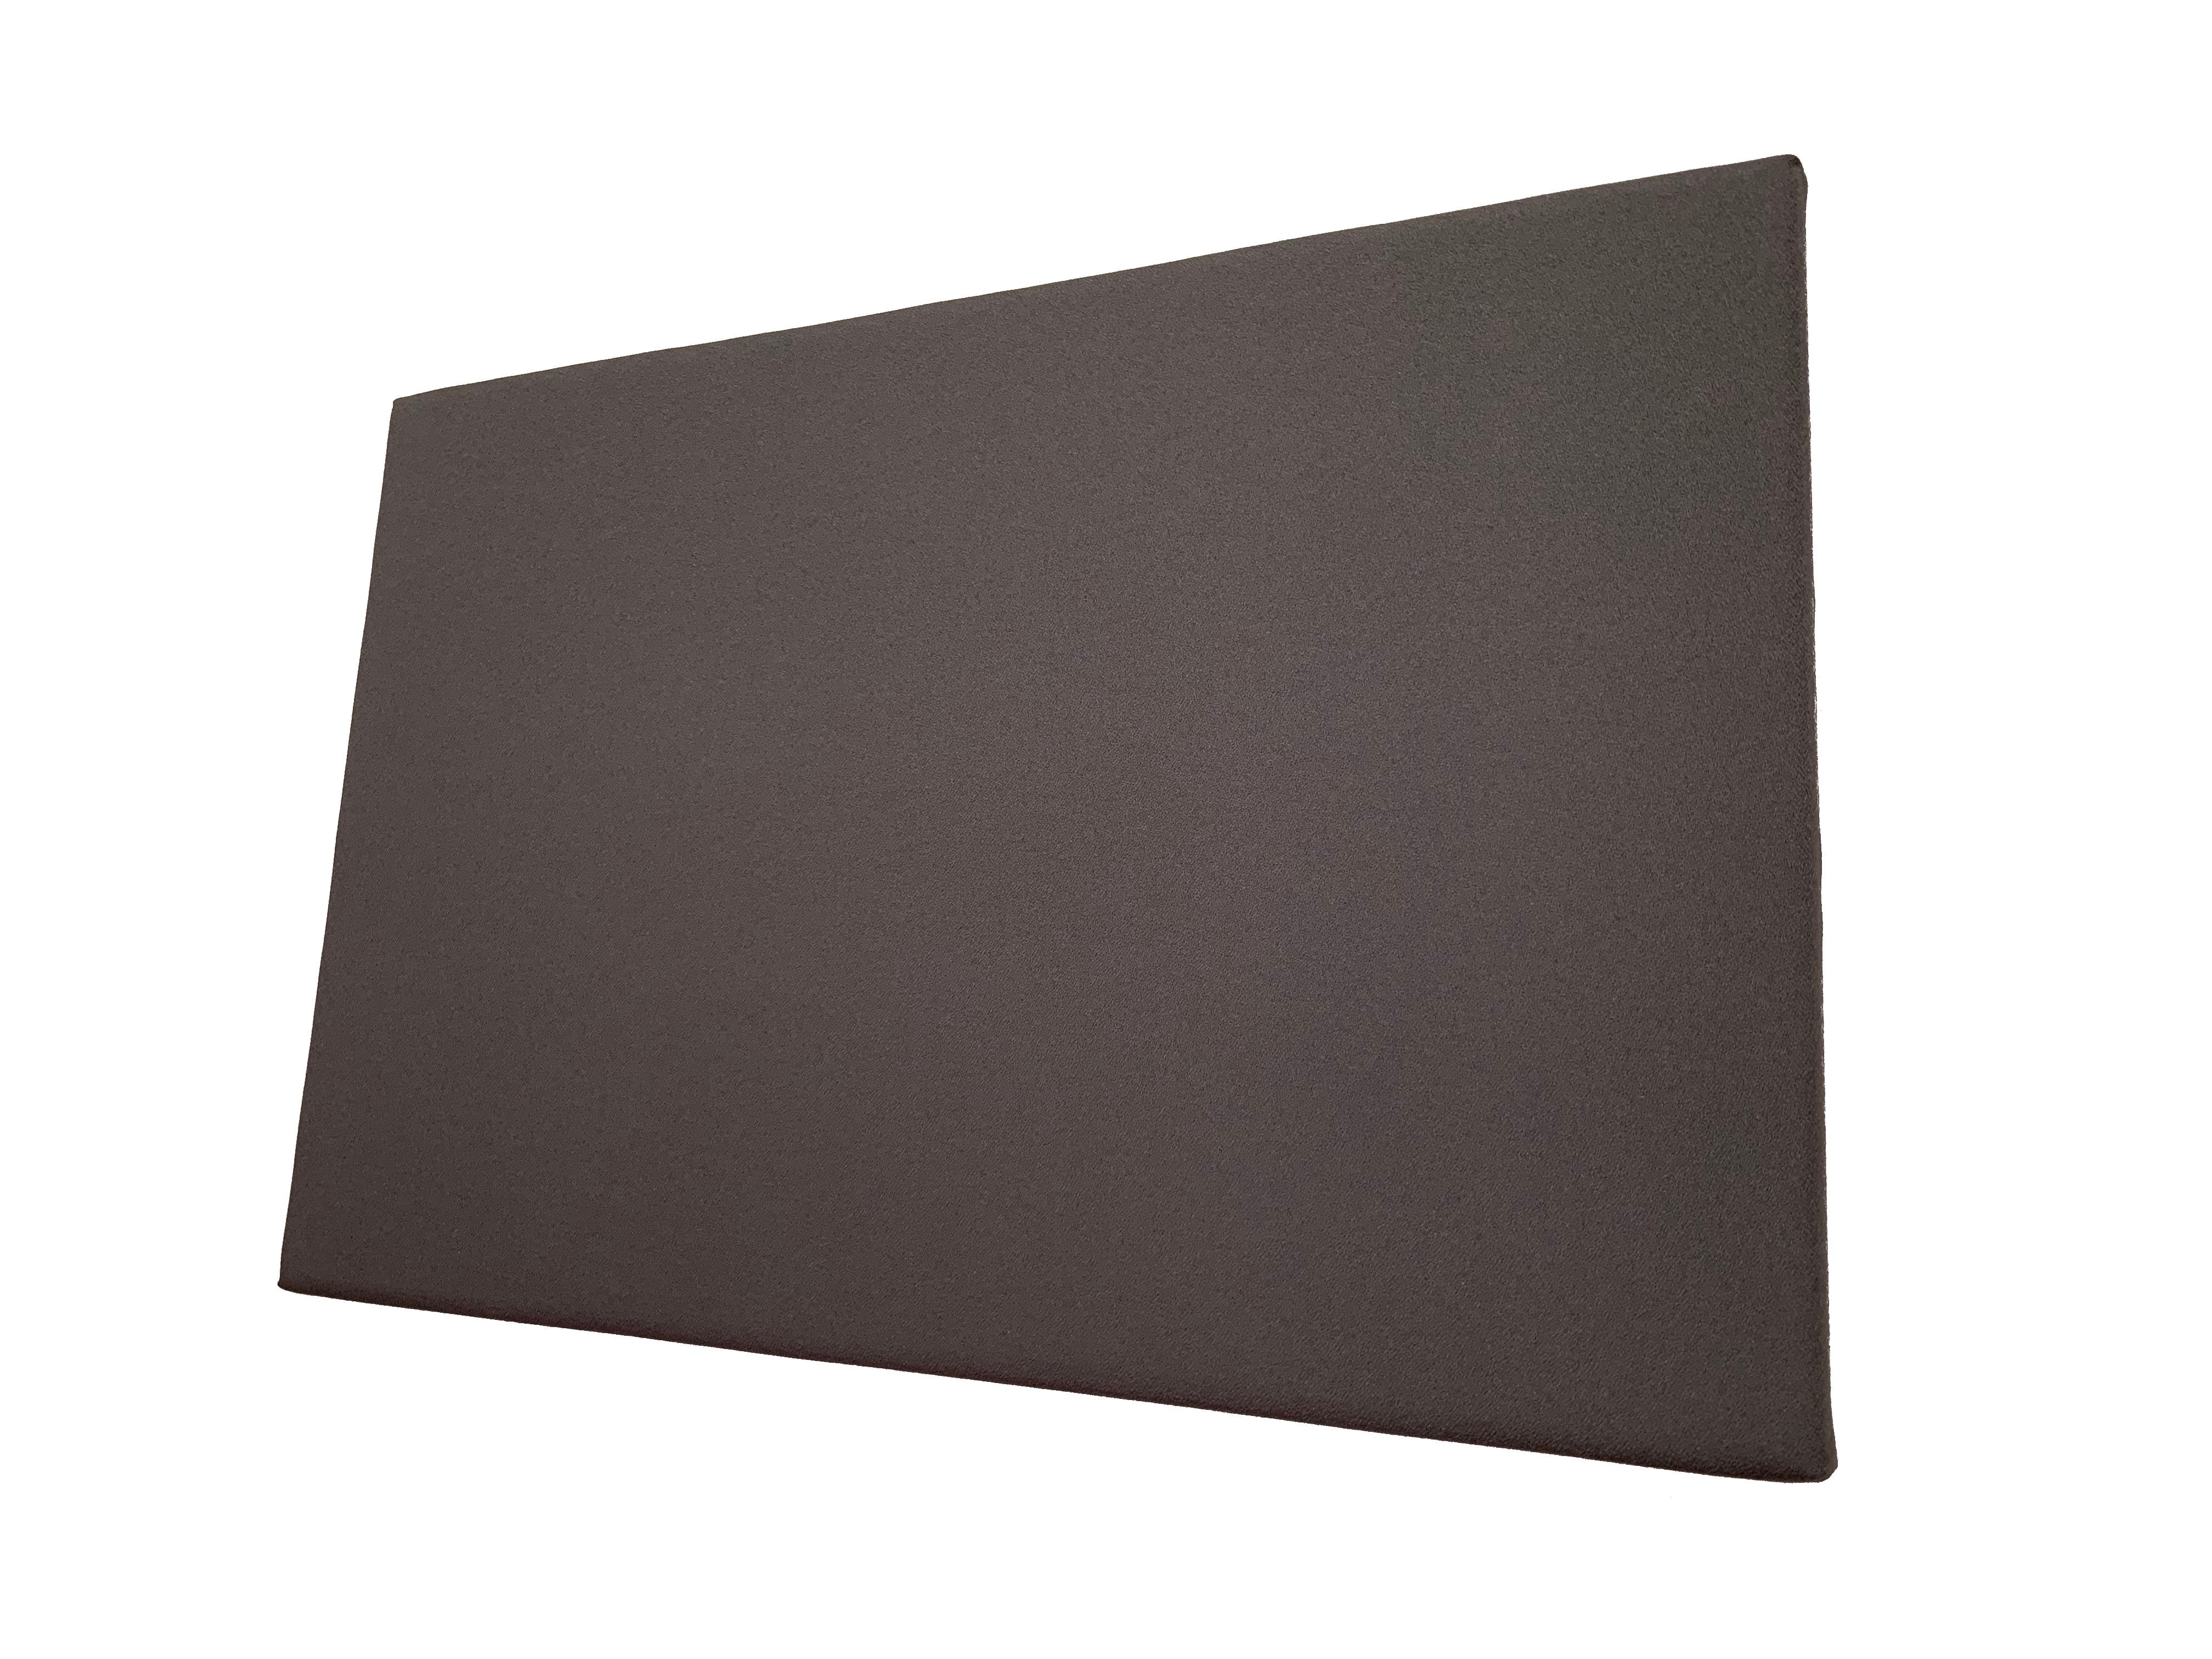 2" SoundControl Ceiling Mounted Acoustic Panel 2ft by 3ft - Advanced Acoustics